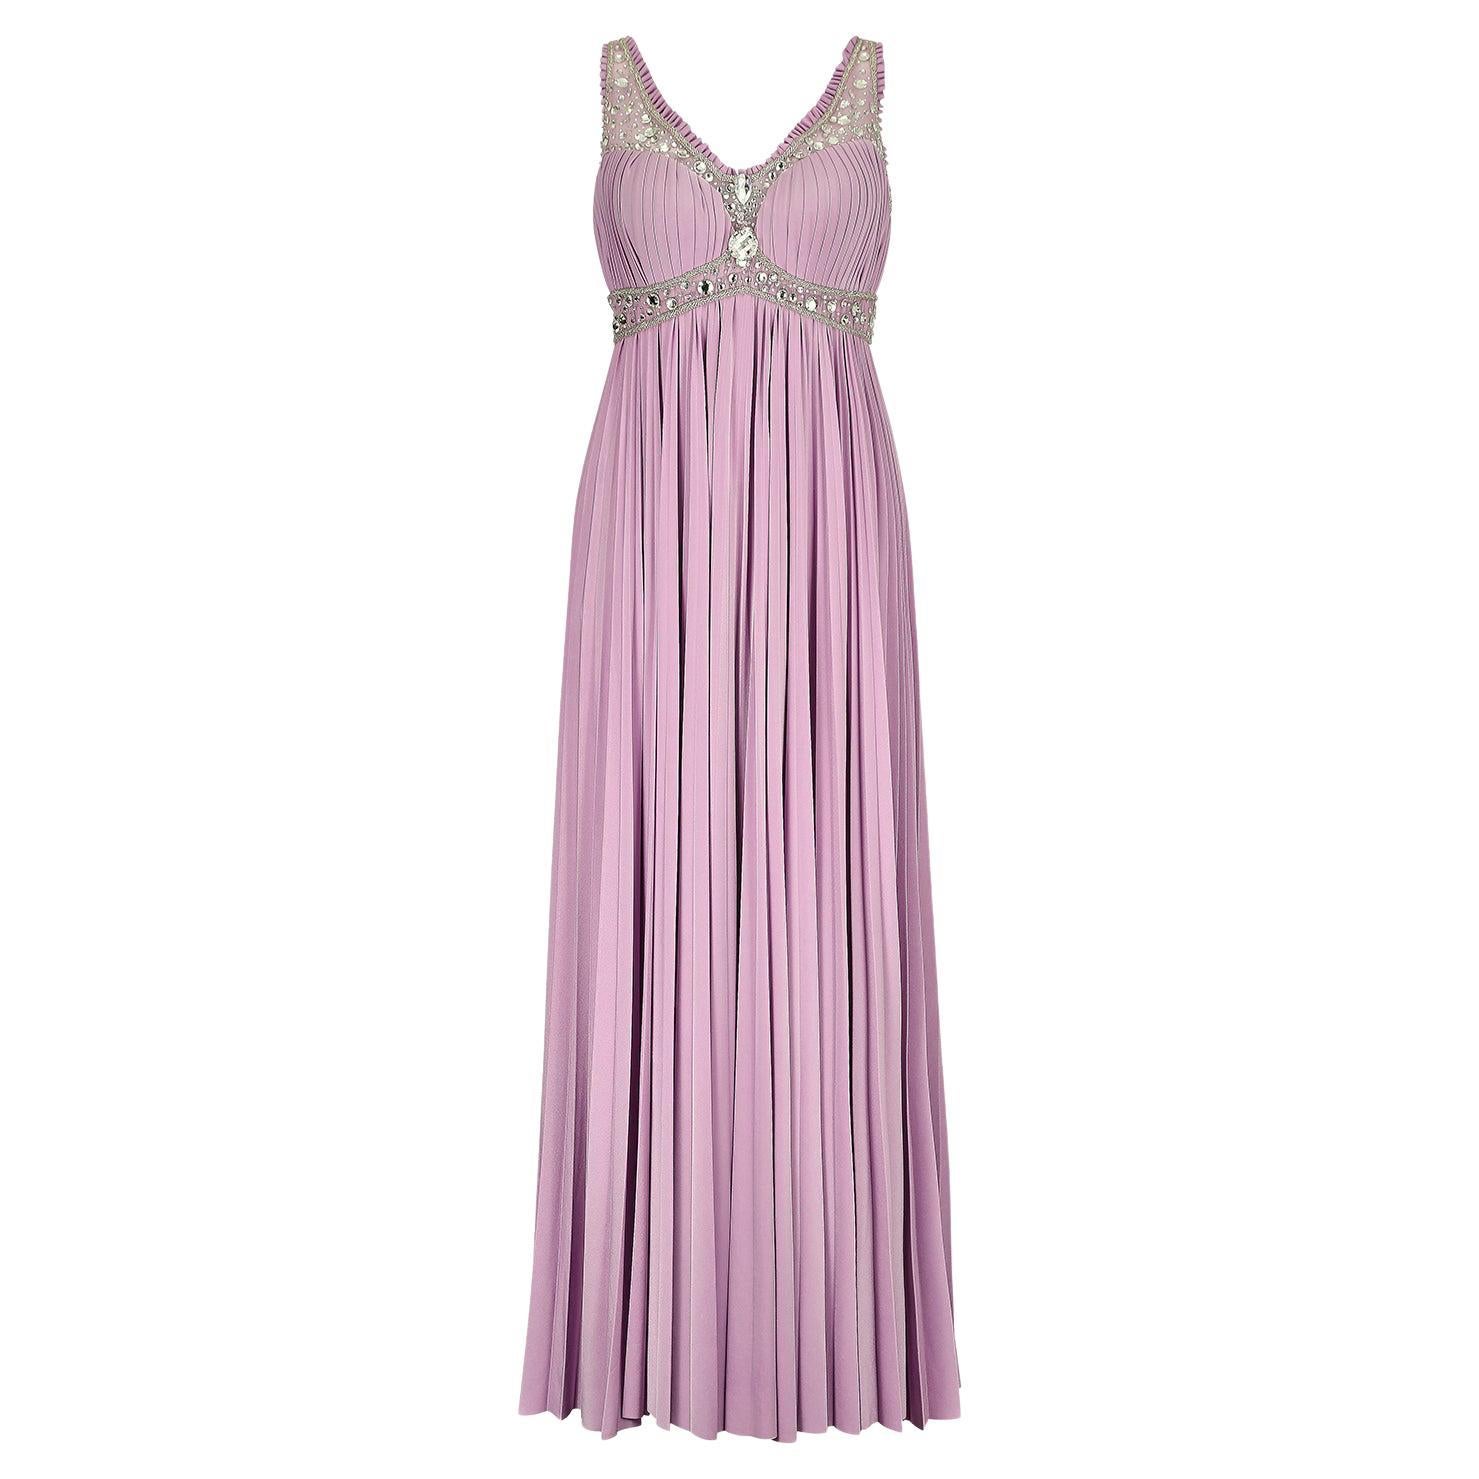 1990s Bespoke Lilac Crystal-Embellished Gown For Sale